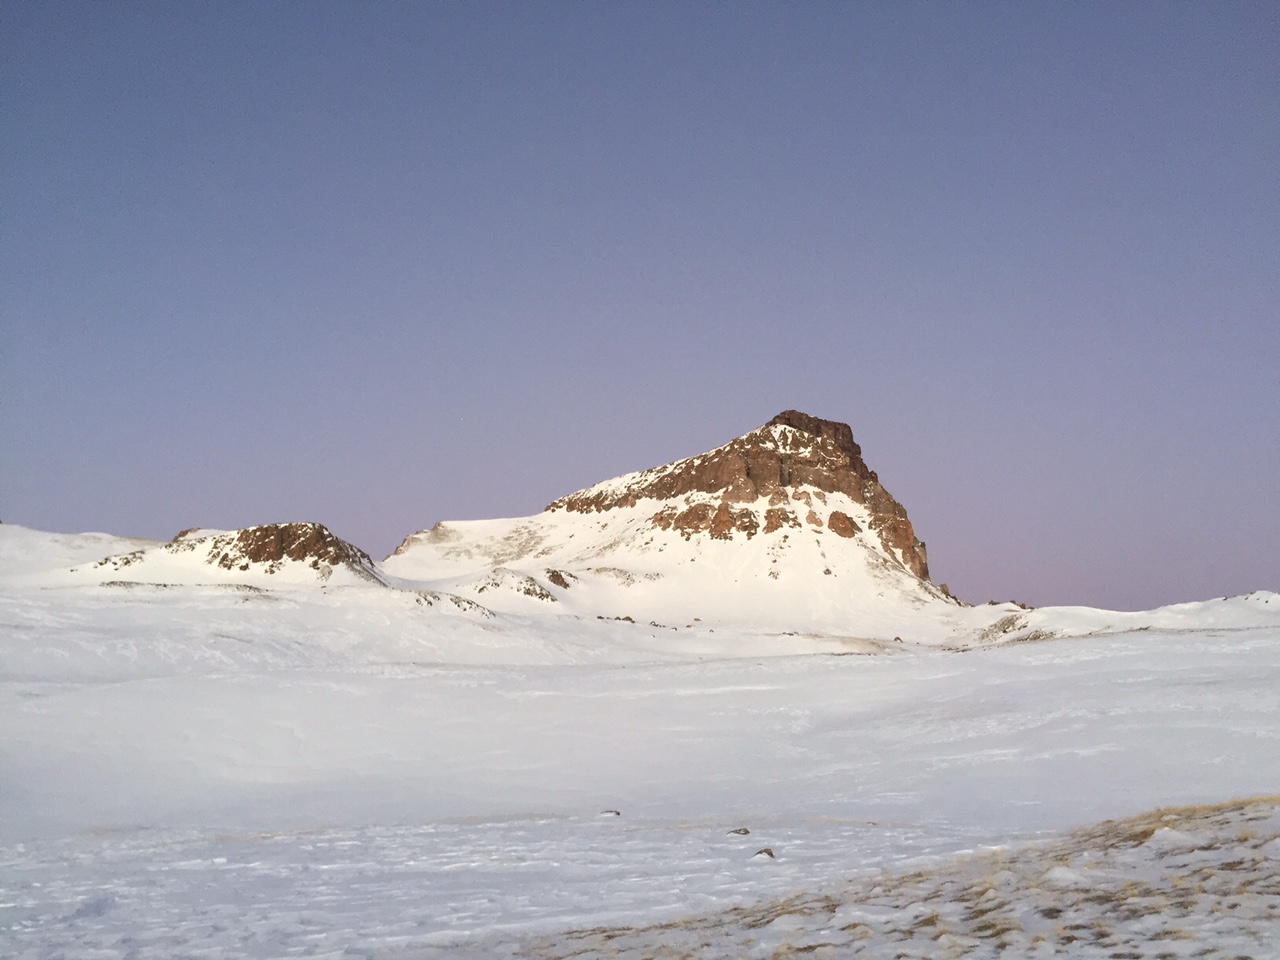 Approaching the East Face of Uncompahgre just before sunrise